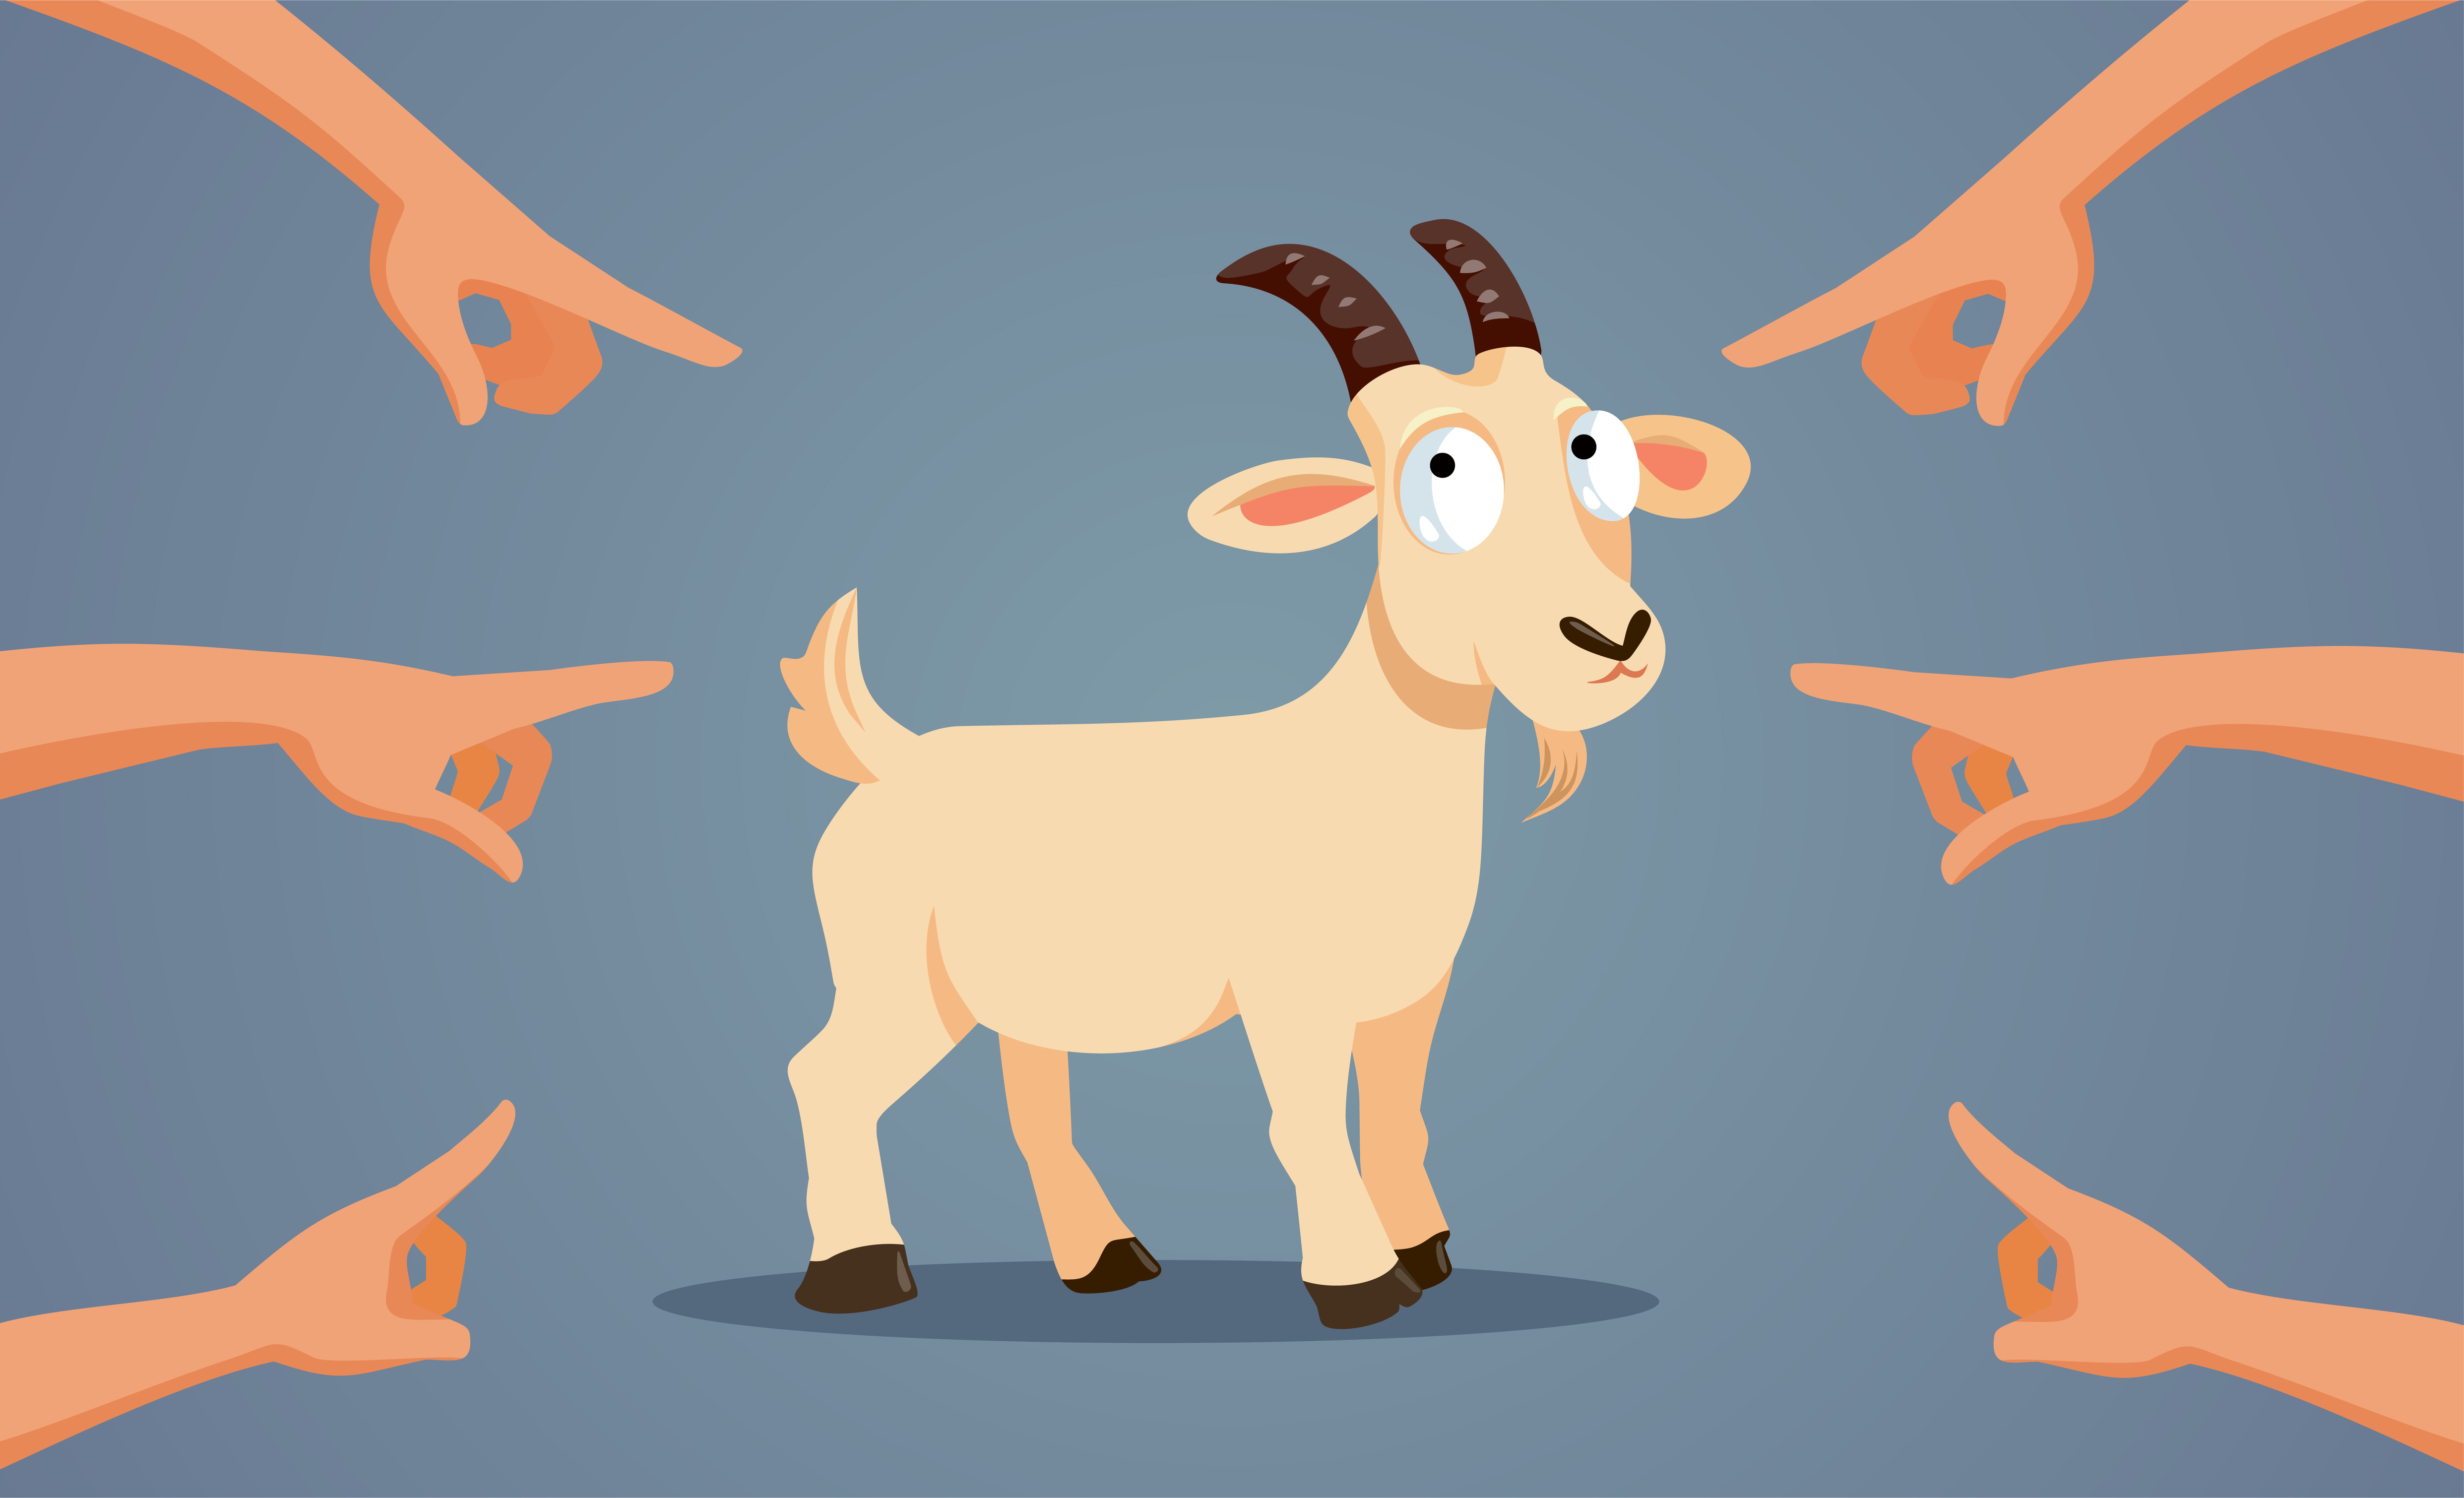 Illustration of a goat looking anxious as 6 fingers point at it from outside the frame